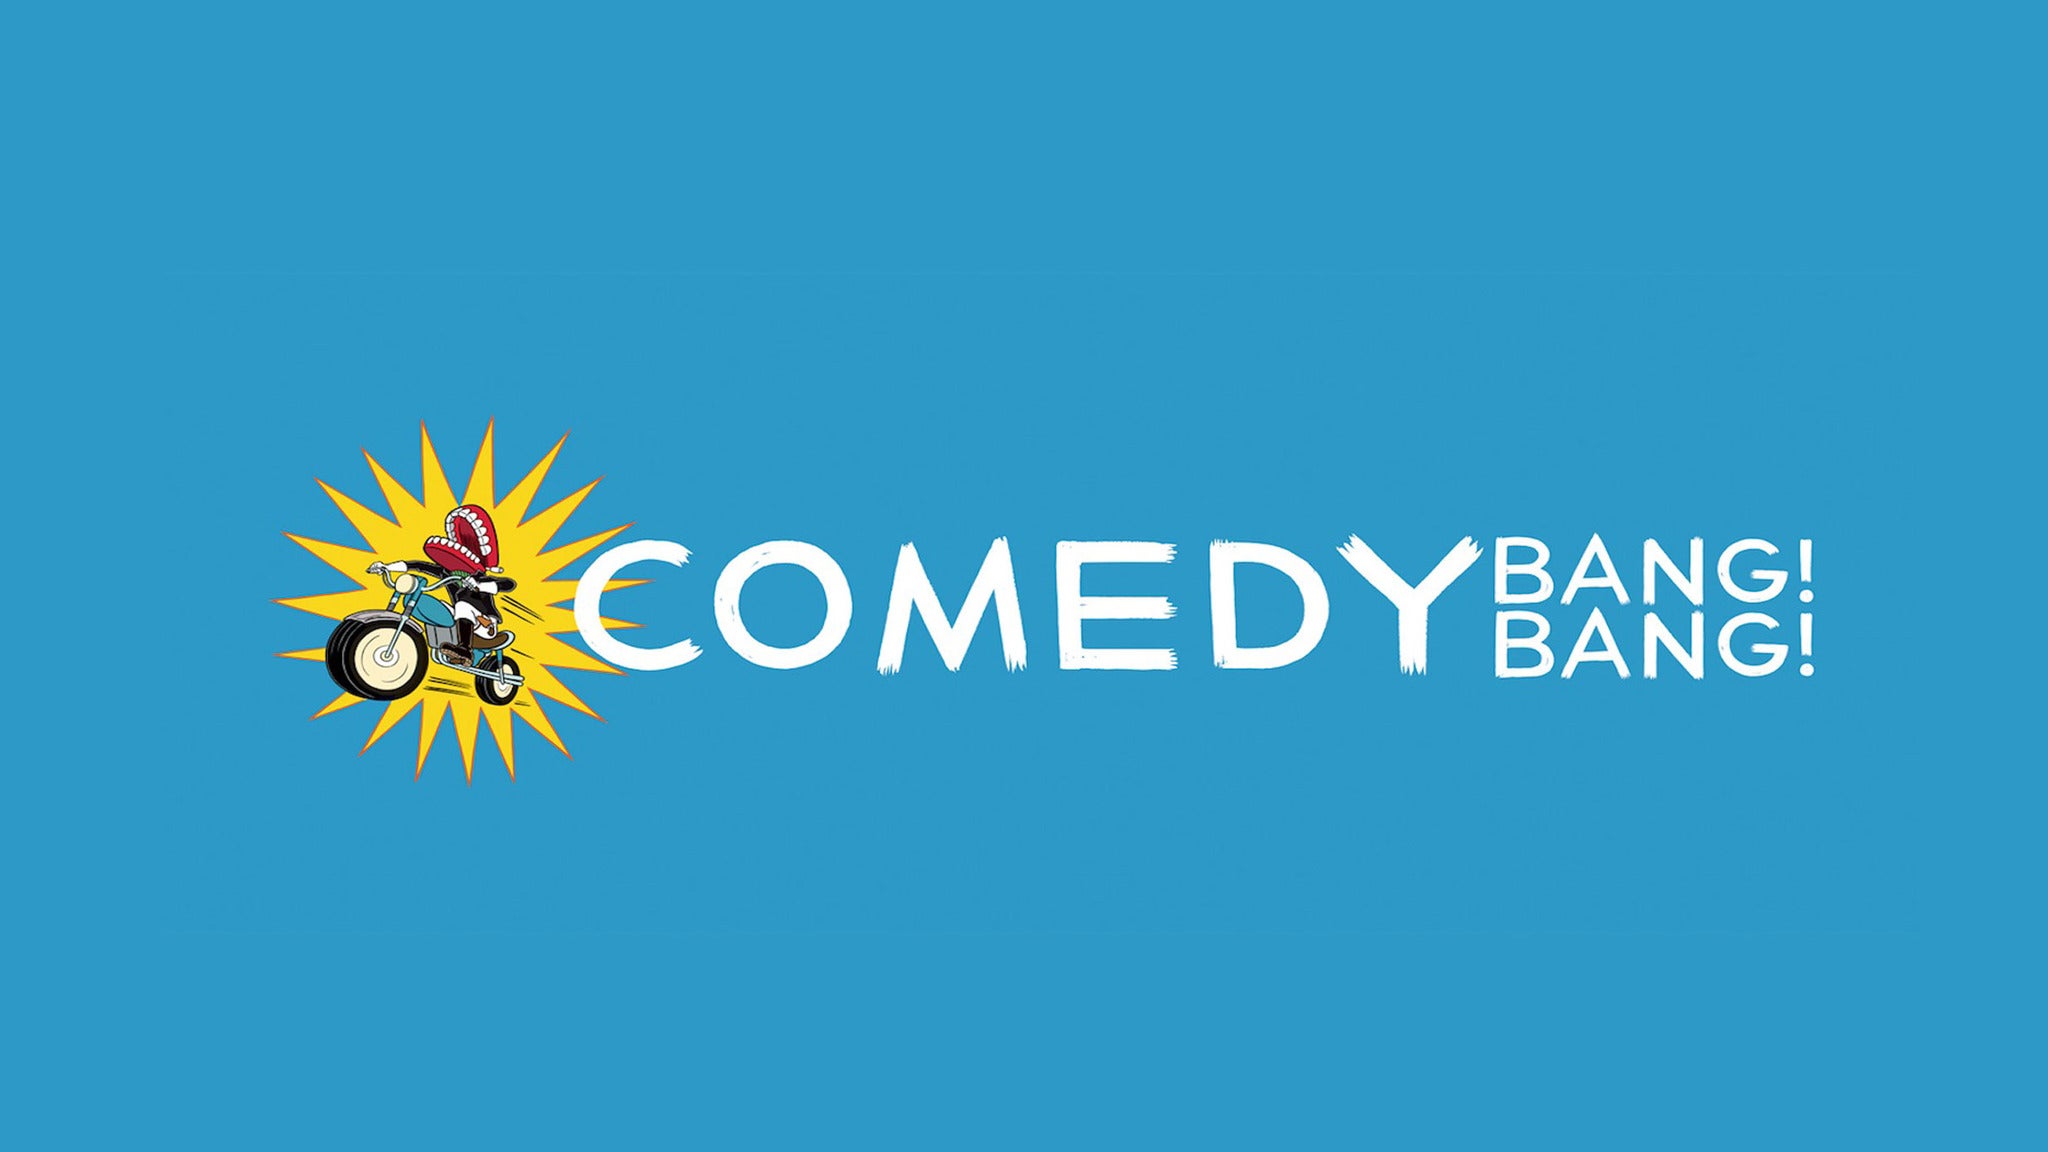 Comedy Bang! Bang! Live! Starring Scott Aukerman with guests in Chicago promo photo for Artist presale offer code